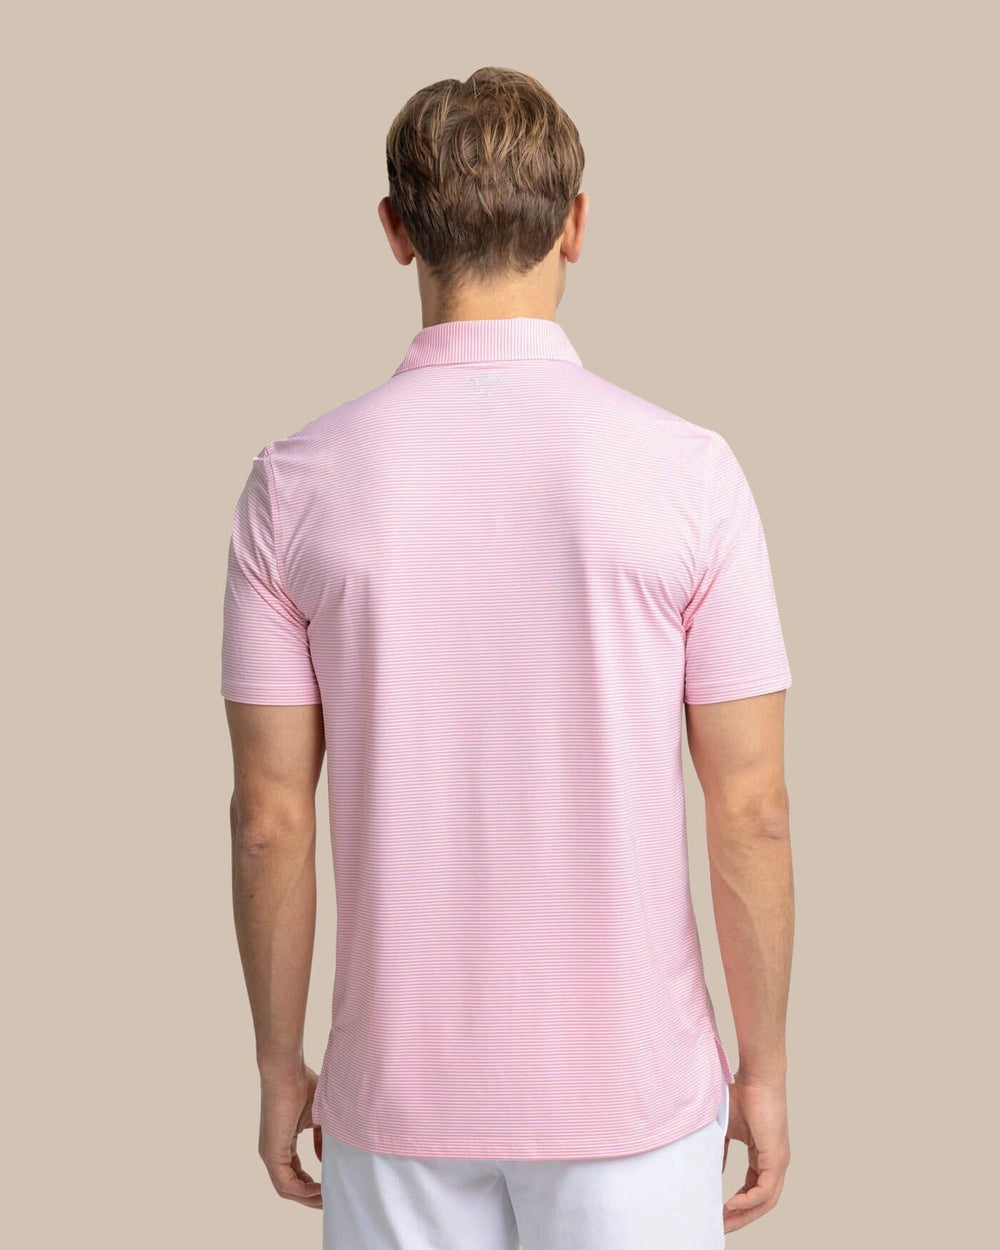 The back view of the Southern Tide brrr-eeze Meadowbrook Stripe Polo by Southern Tide - Geranium Pink